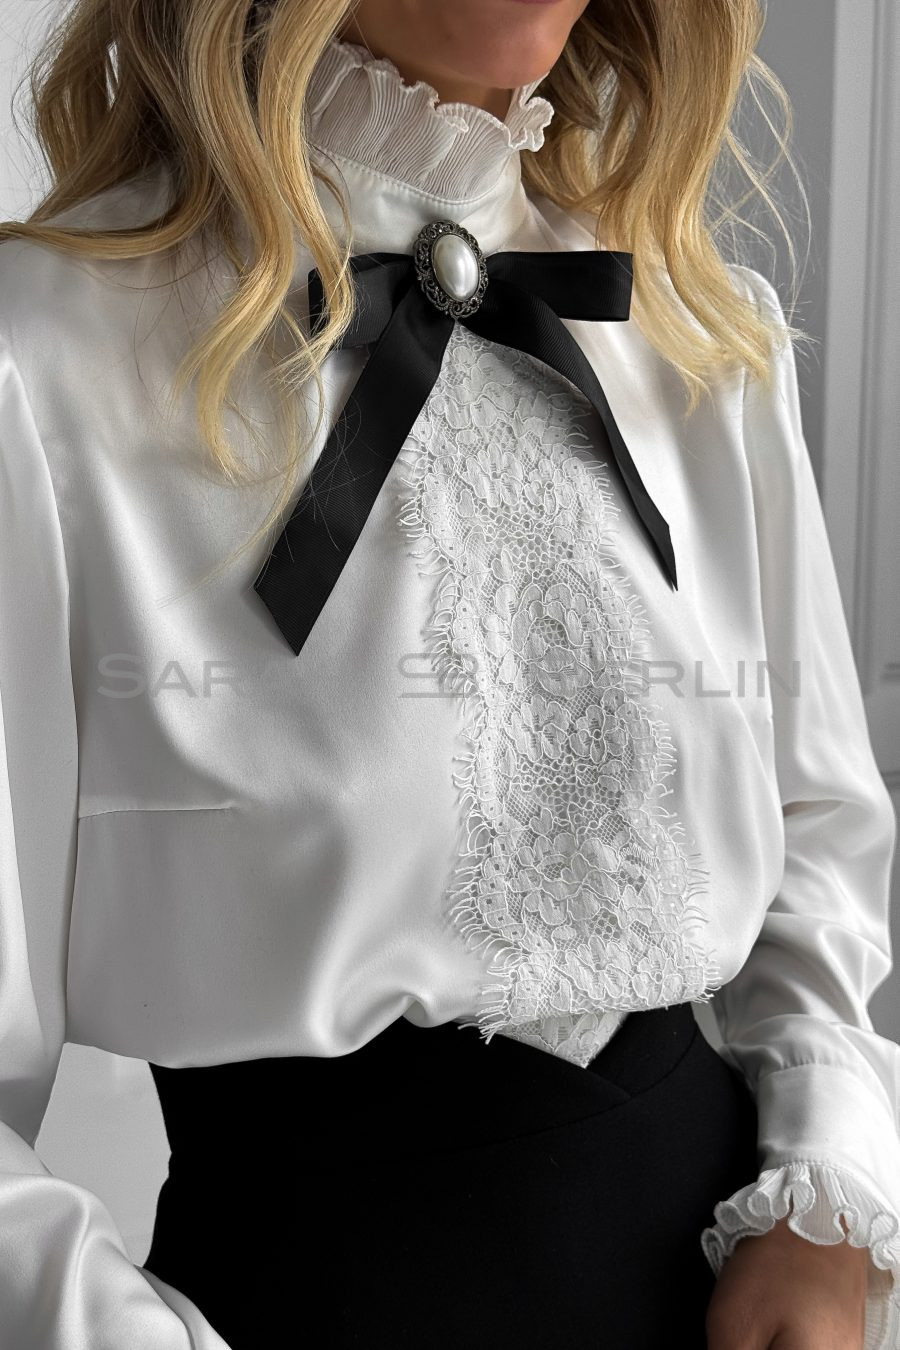 Silk blouse with lace, cuffs and pleated collar